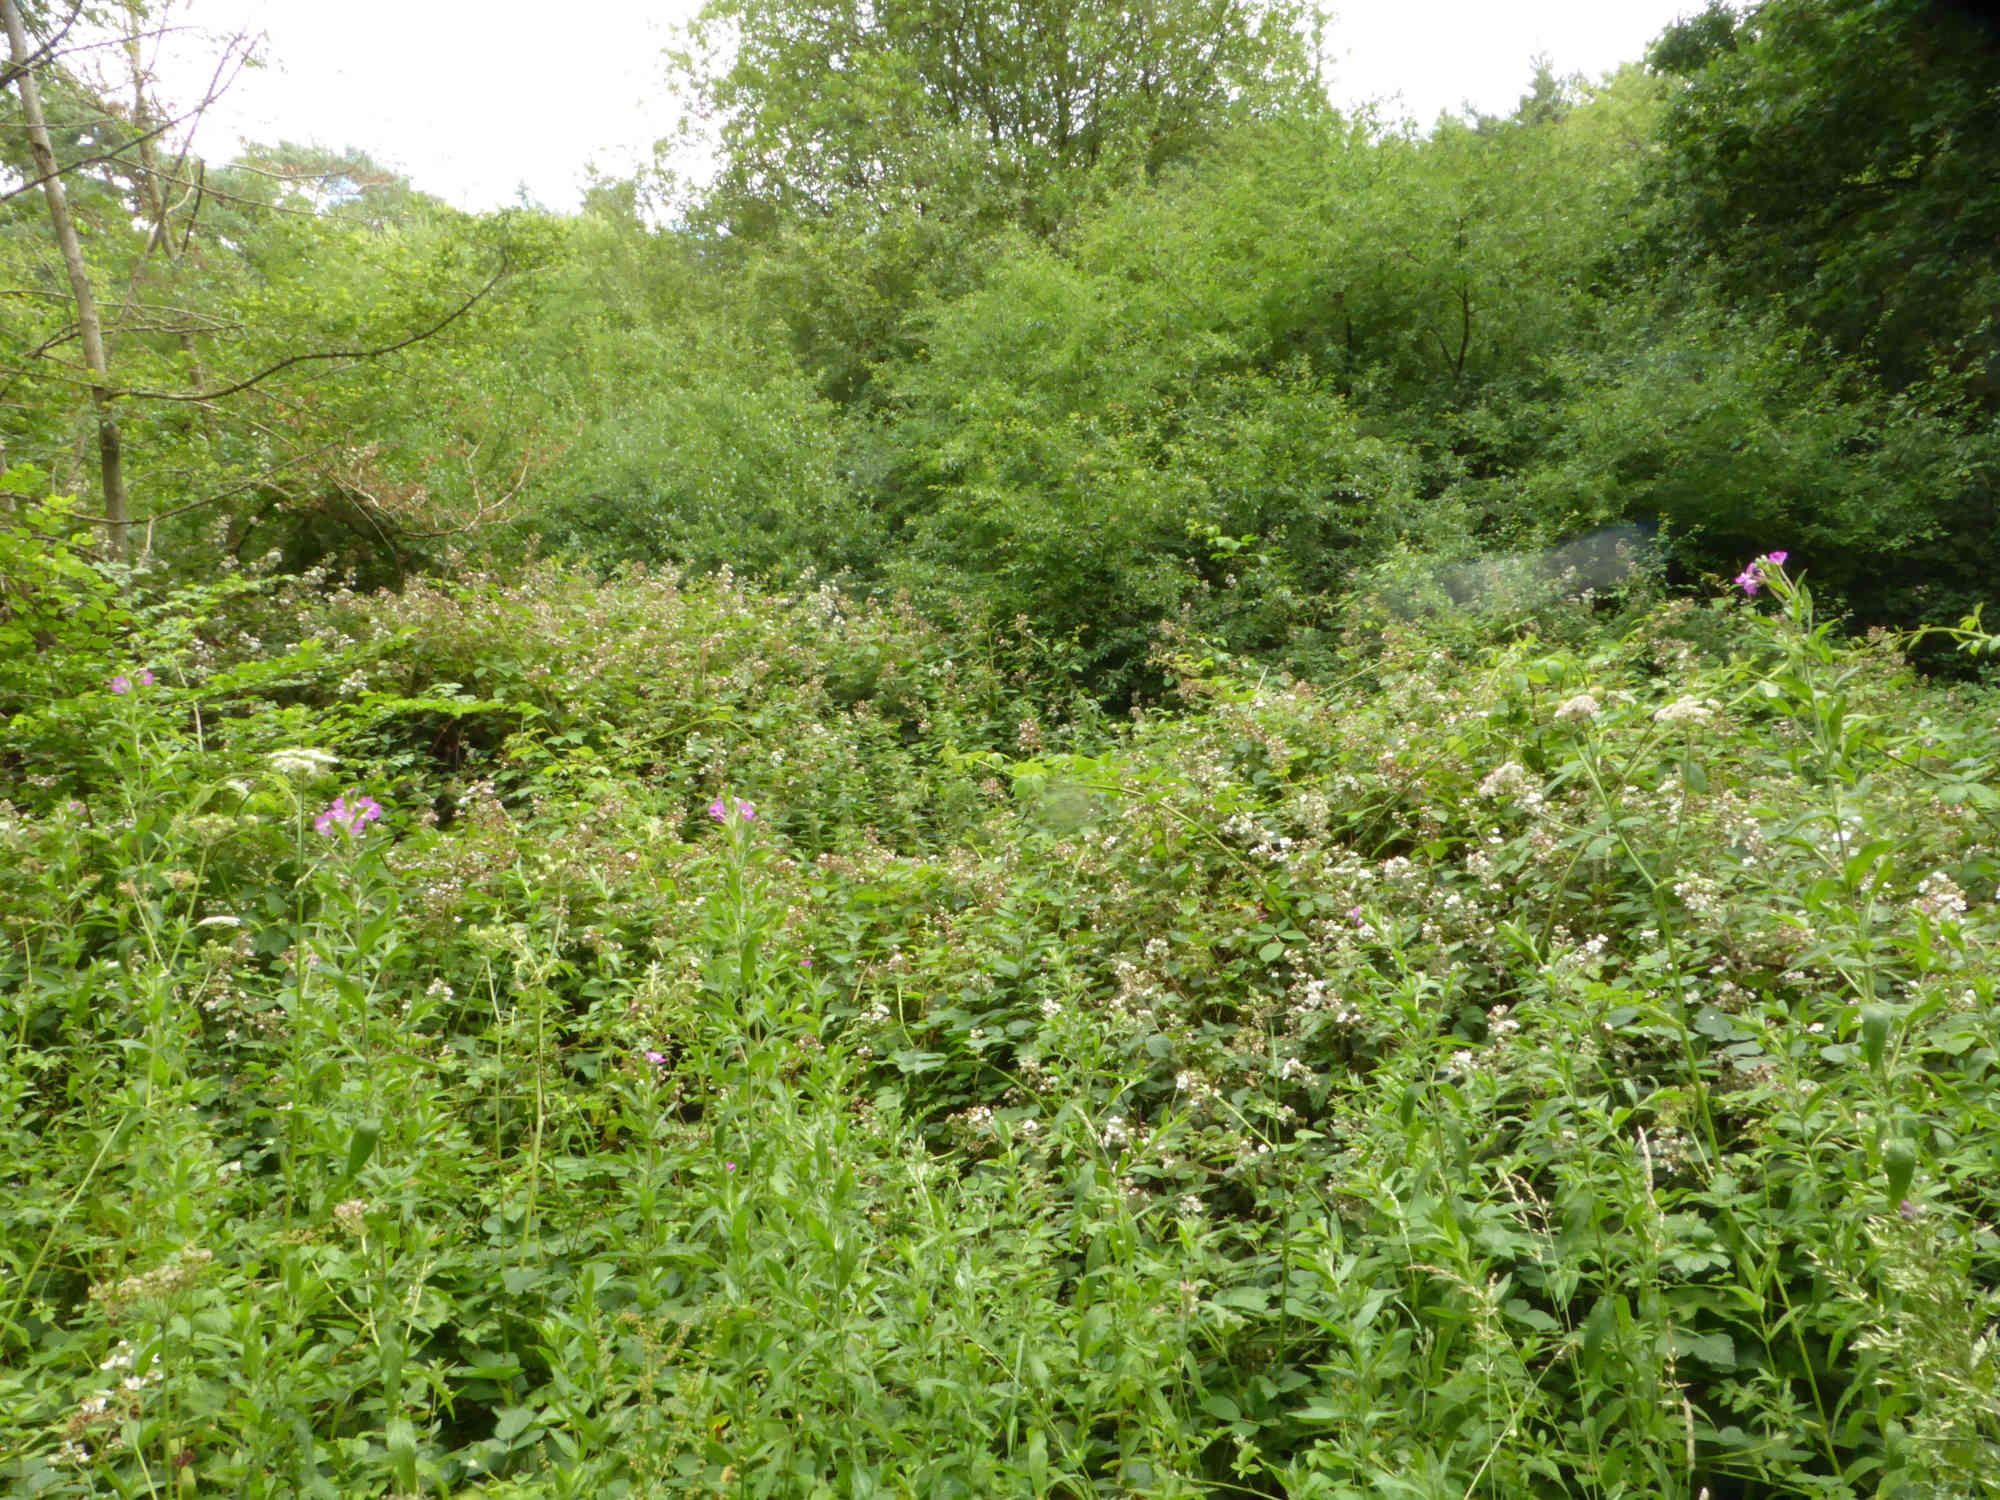 Bramble blossom is amongst the very best of the nectar plants. We have encouraged out of the way bramble thickets.